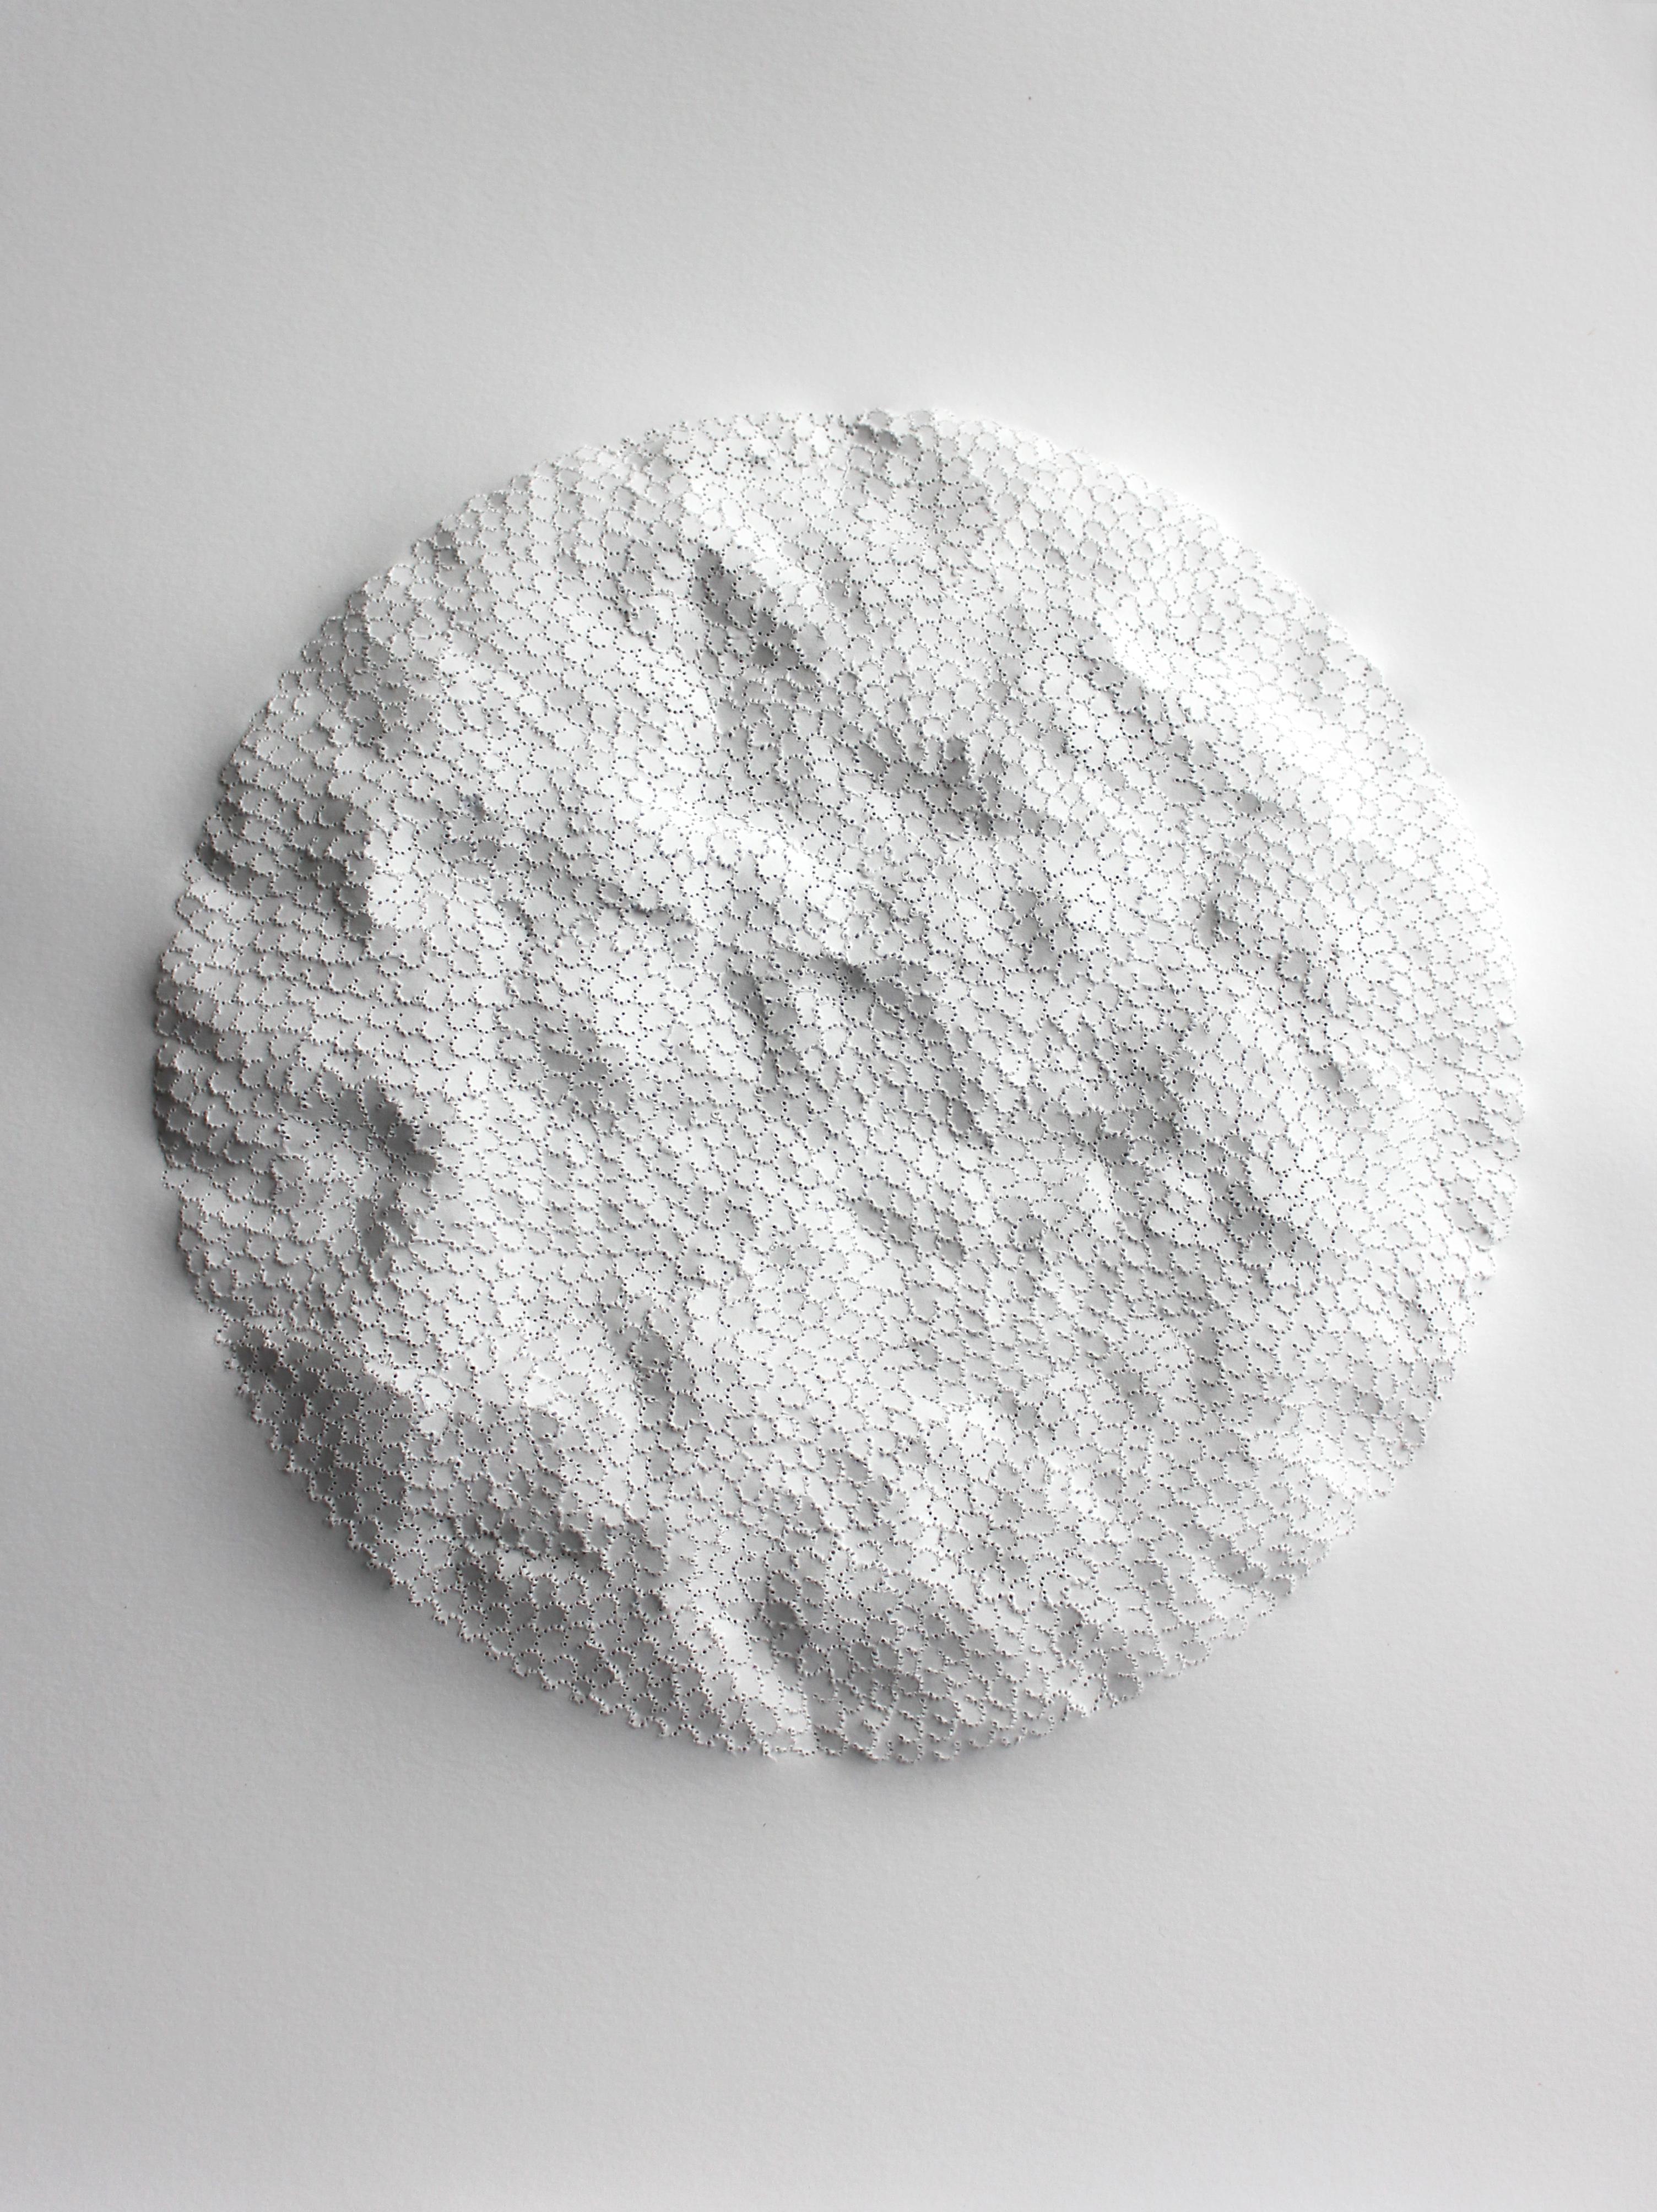 Anne-Charlotte Saliba Abstract Drawing - White Moon EC 17 - round textural abstract nature inspired 3Dsculpted paper